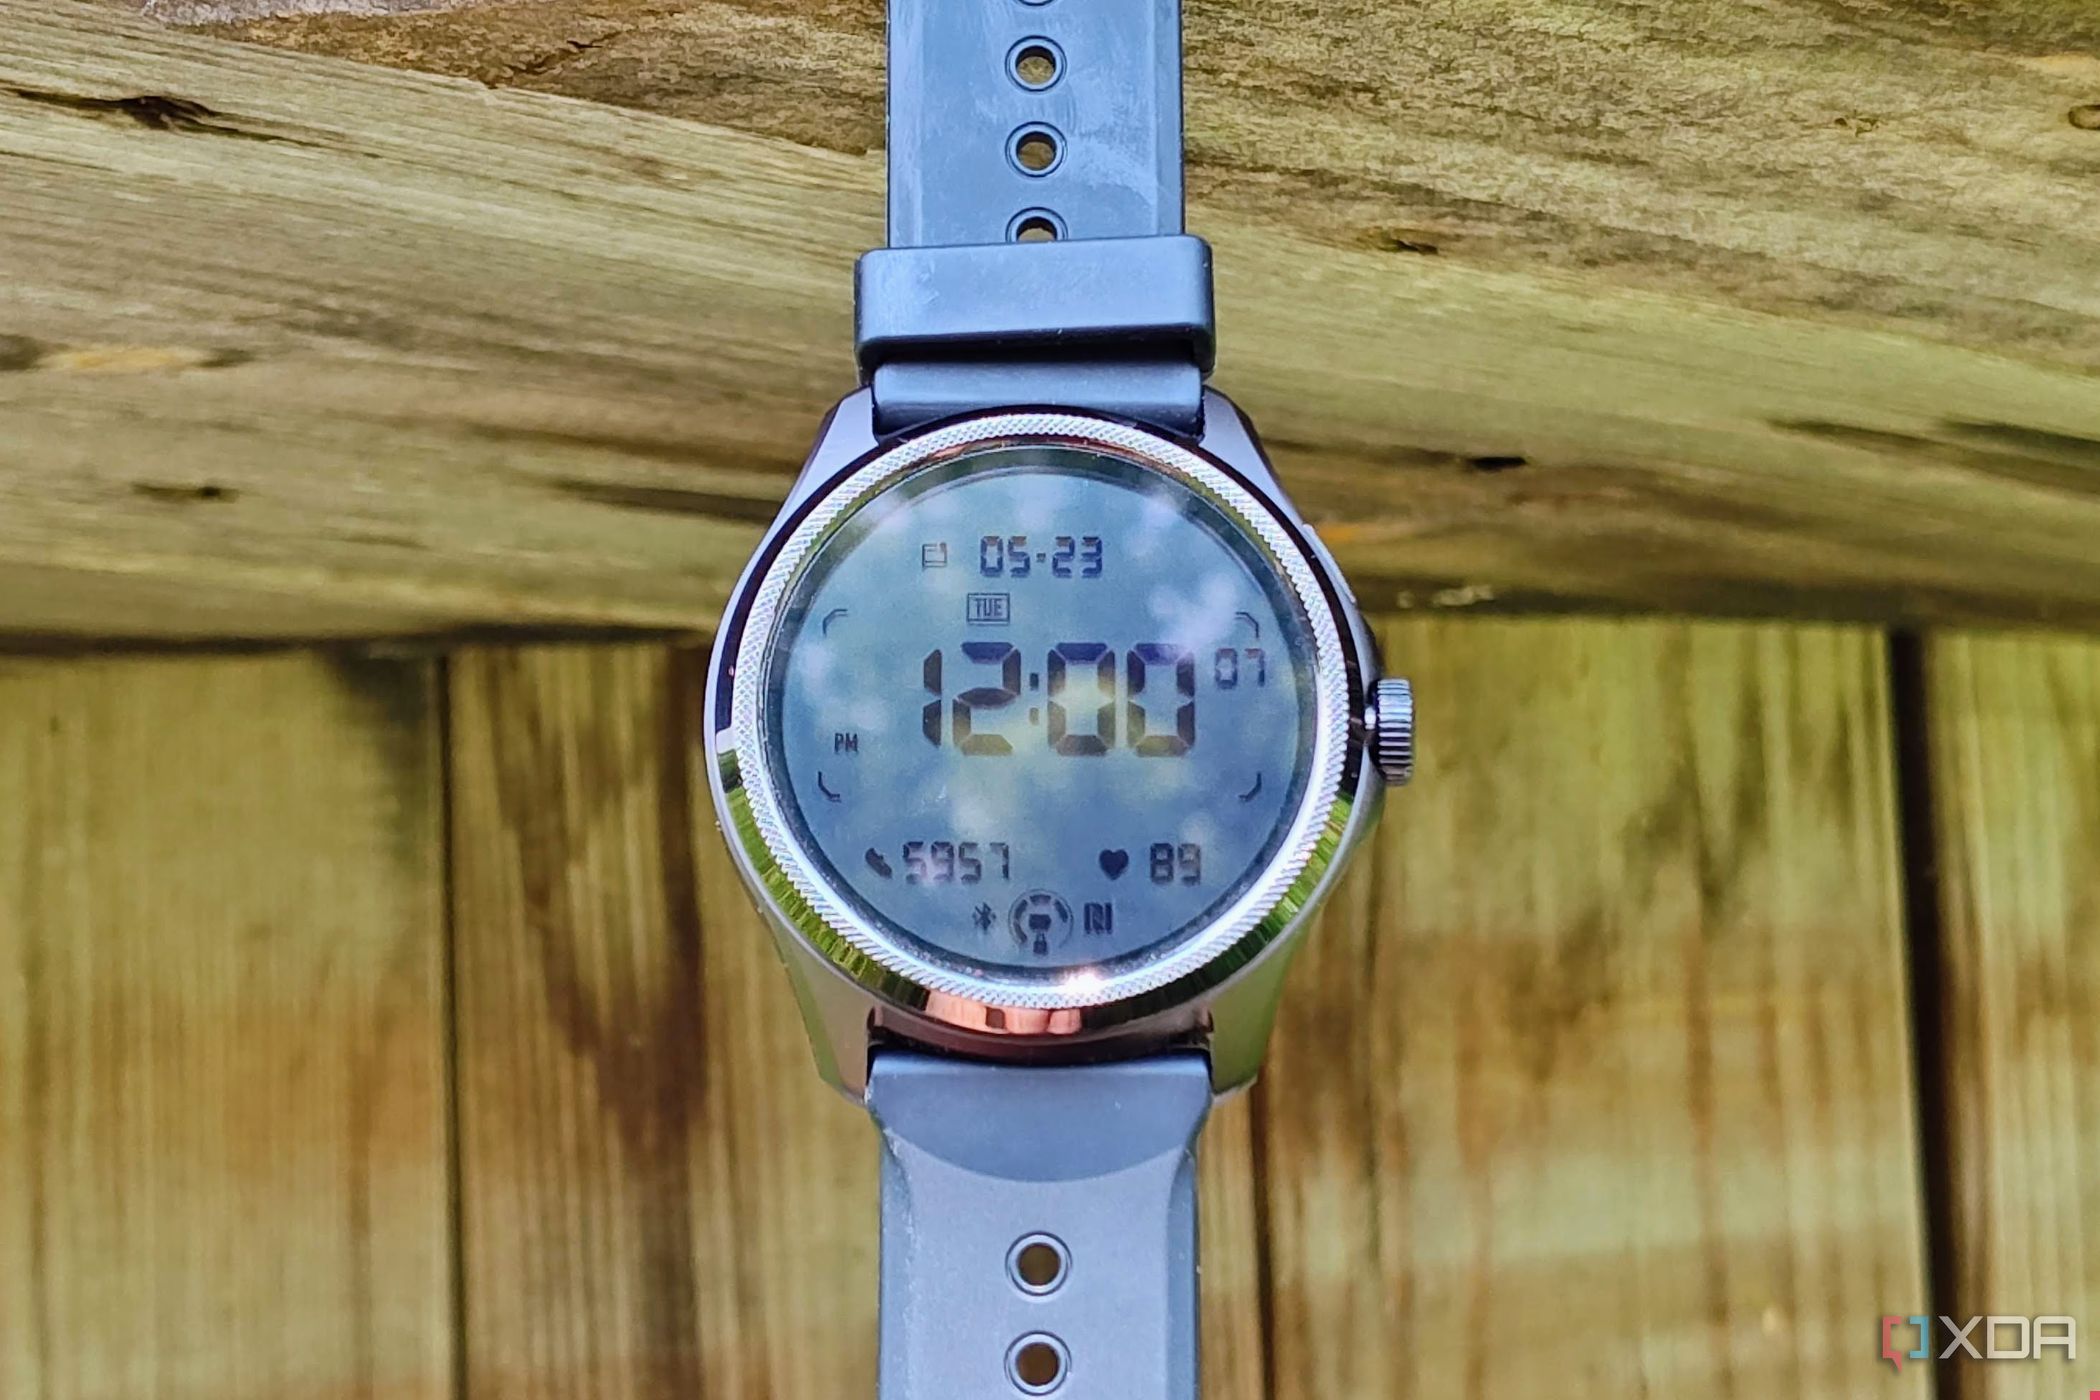 Mobvoi TicWatch Pro 5 shows the secondary screen